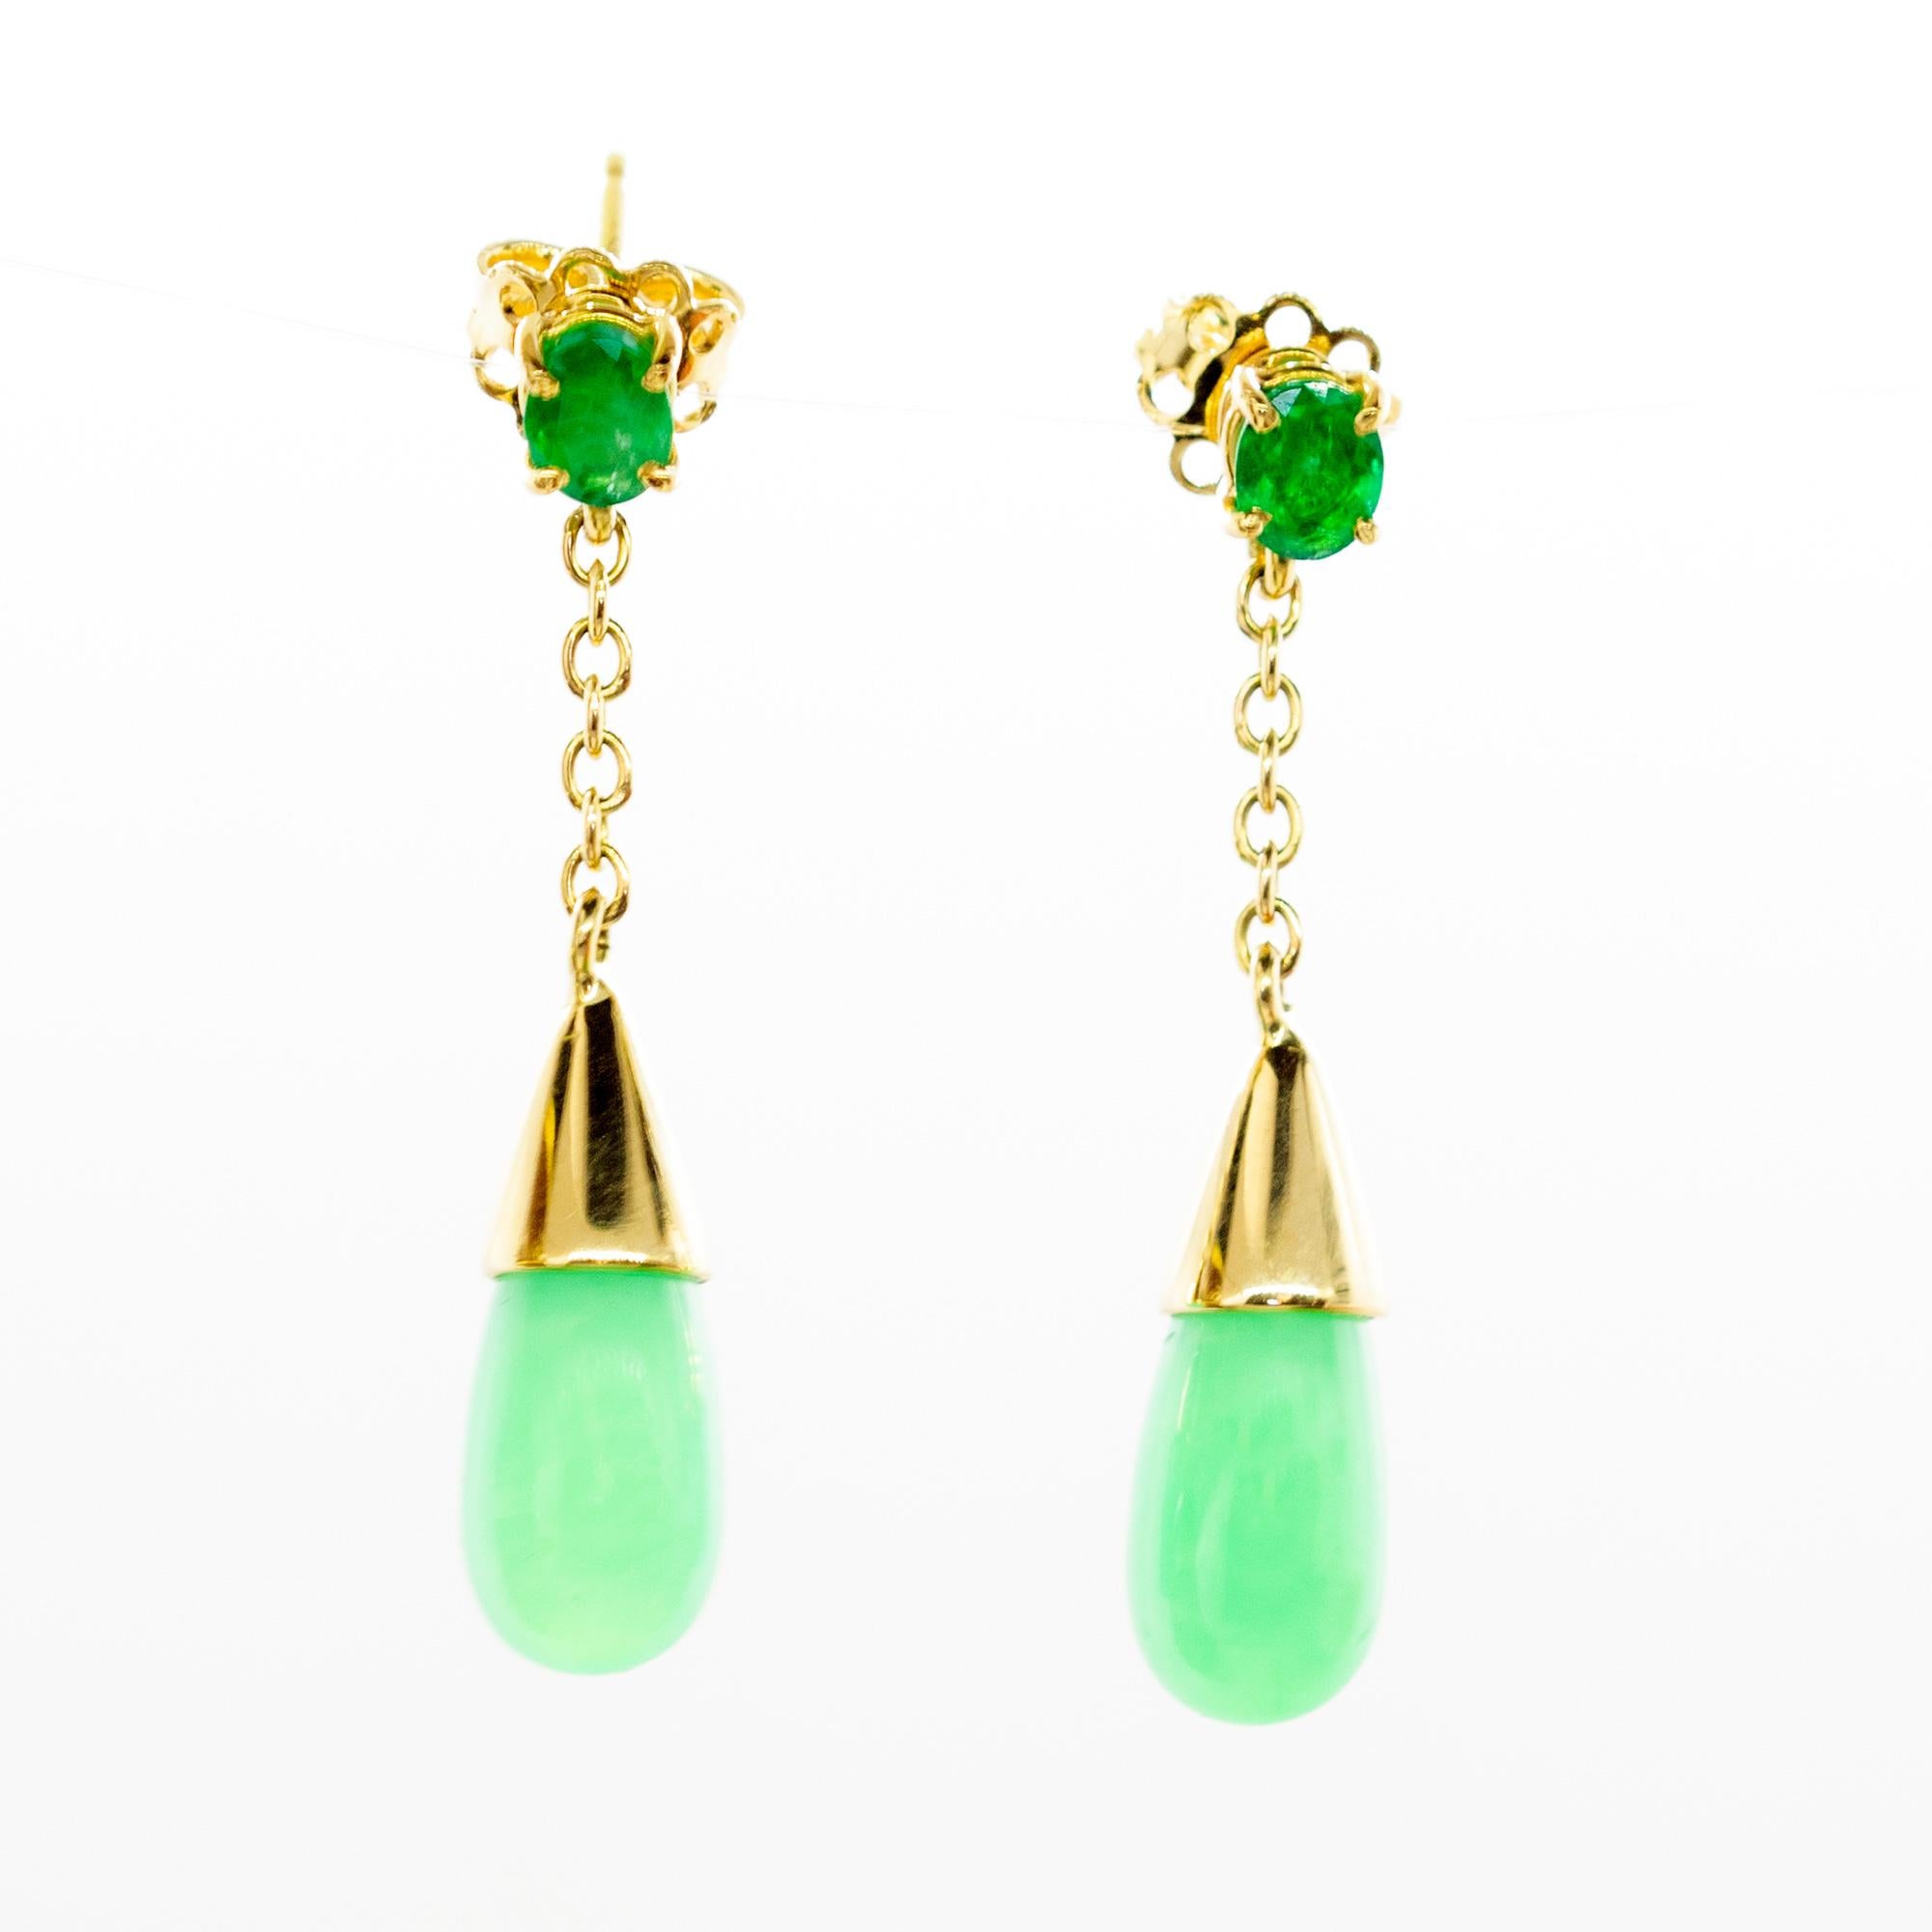 Dreamy translucent green chrysoprase and precious natural emerald earrings, embellished with 18 karat yellow gold in a unique drop tear-pear shape. Let Intini Jewels, our traditional Handmade Milanese brand, surprise you with fashionable accessories